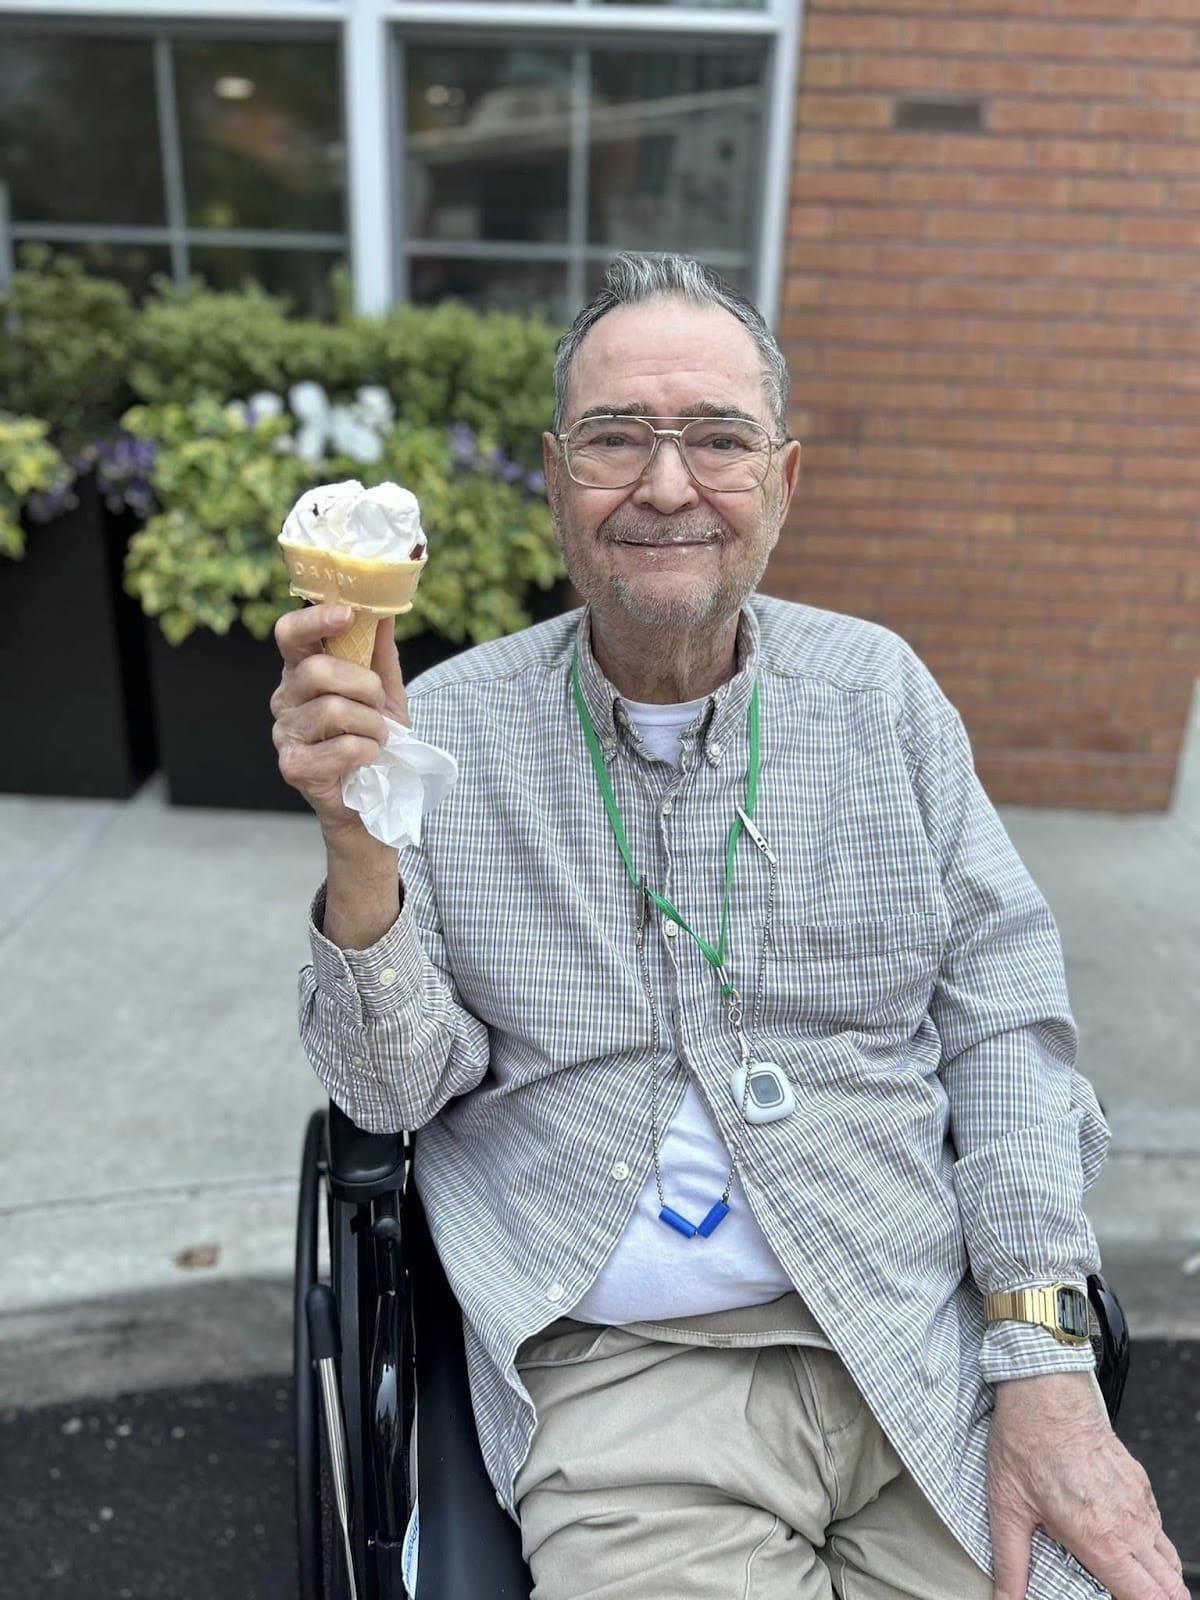 A senior in a wheelchair smiling and holding up an ice cream cone.